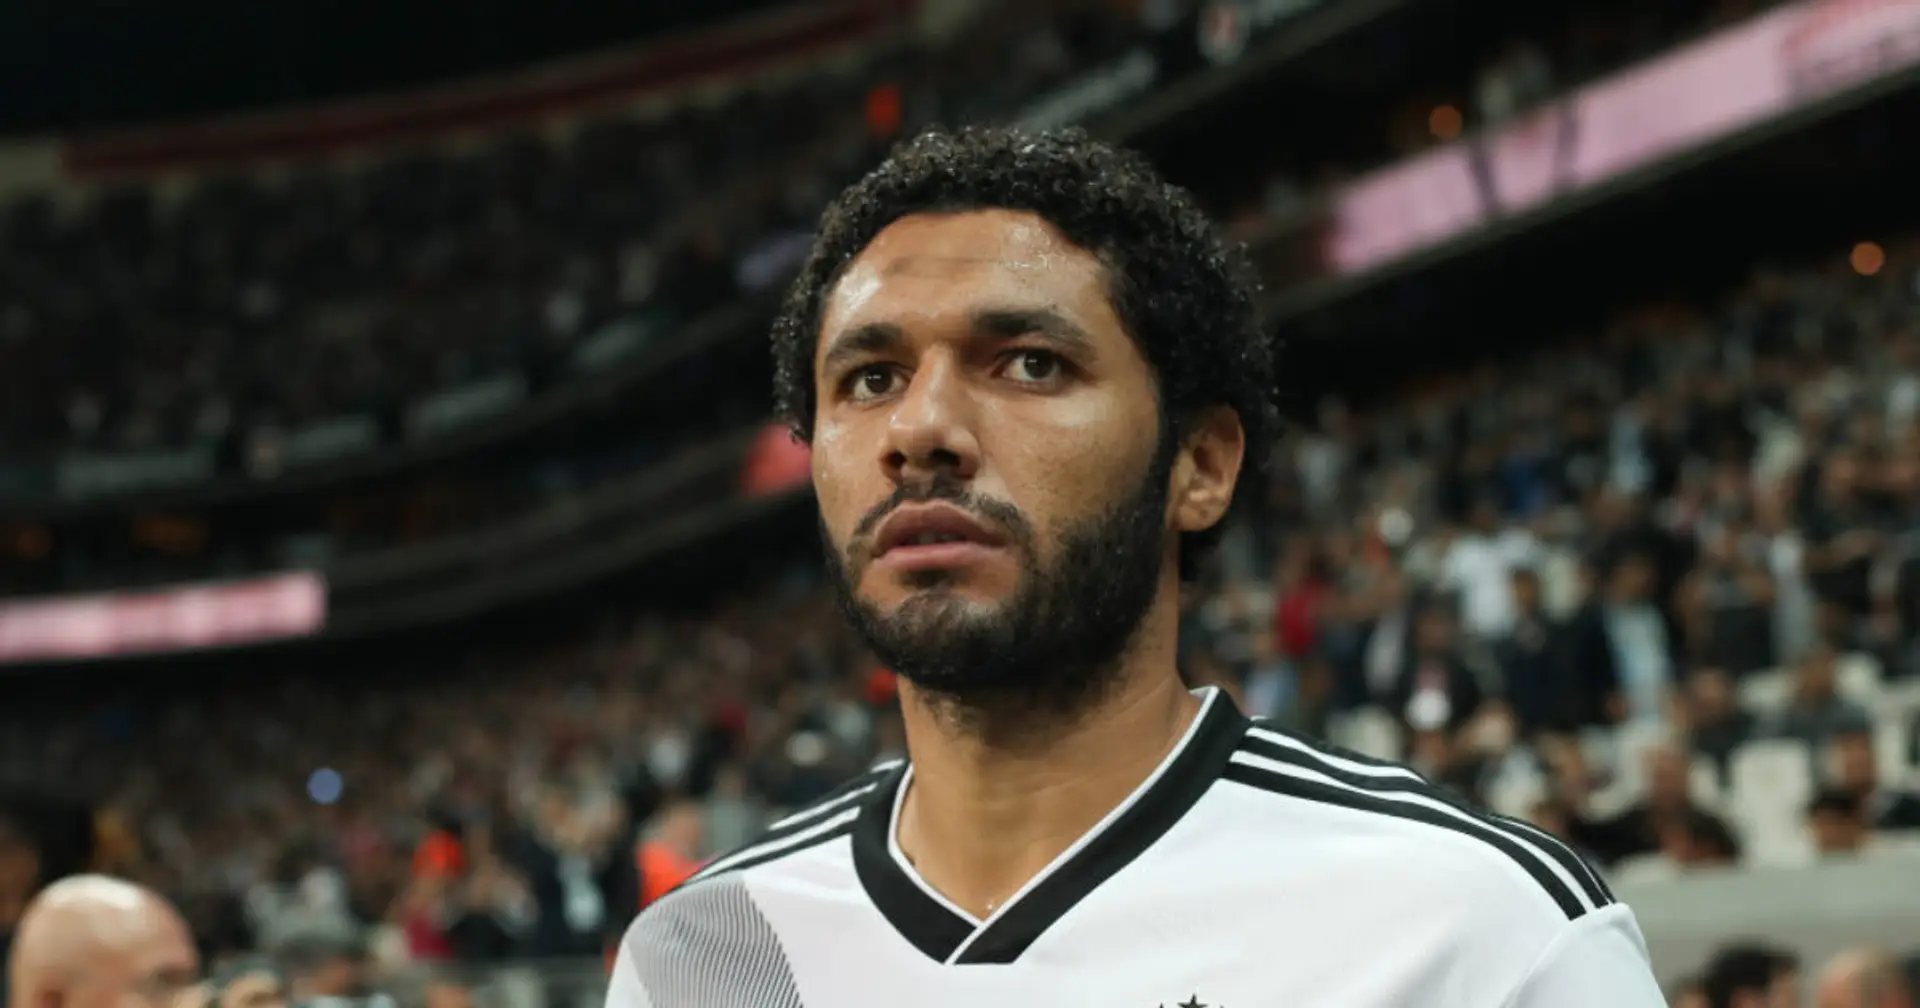 Mohamed Elneny reportedly in talks with Trabzonspor over loan move